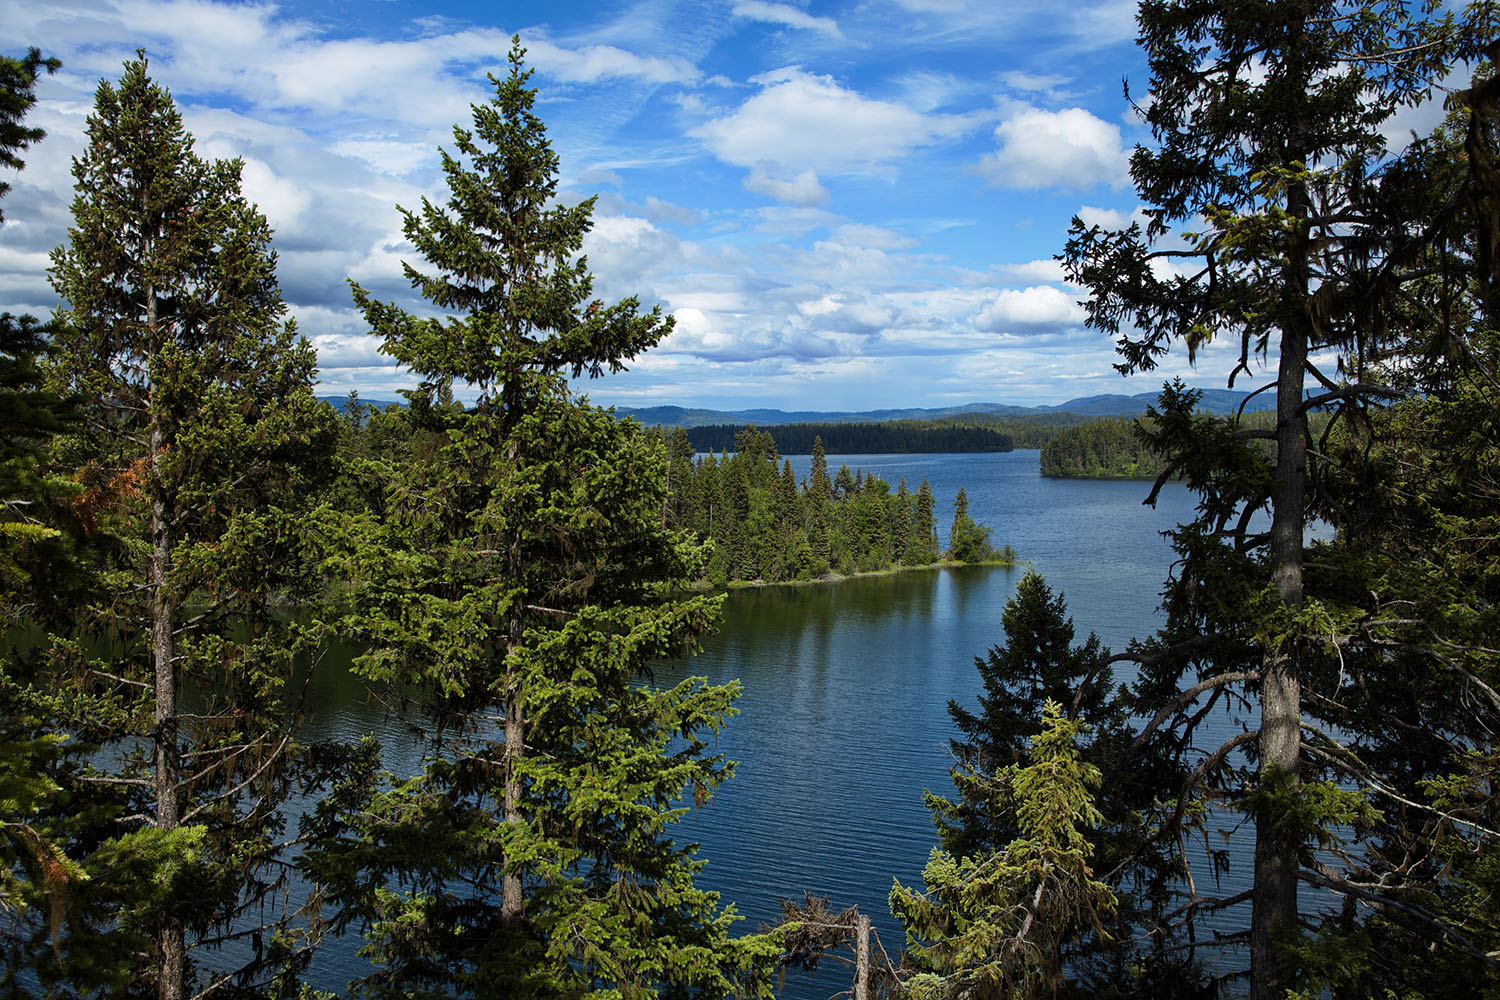 View of a blue lake with tall fir trees growing on the banks. 